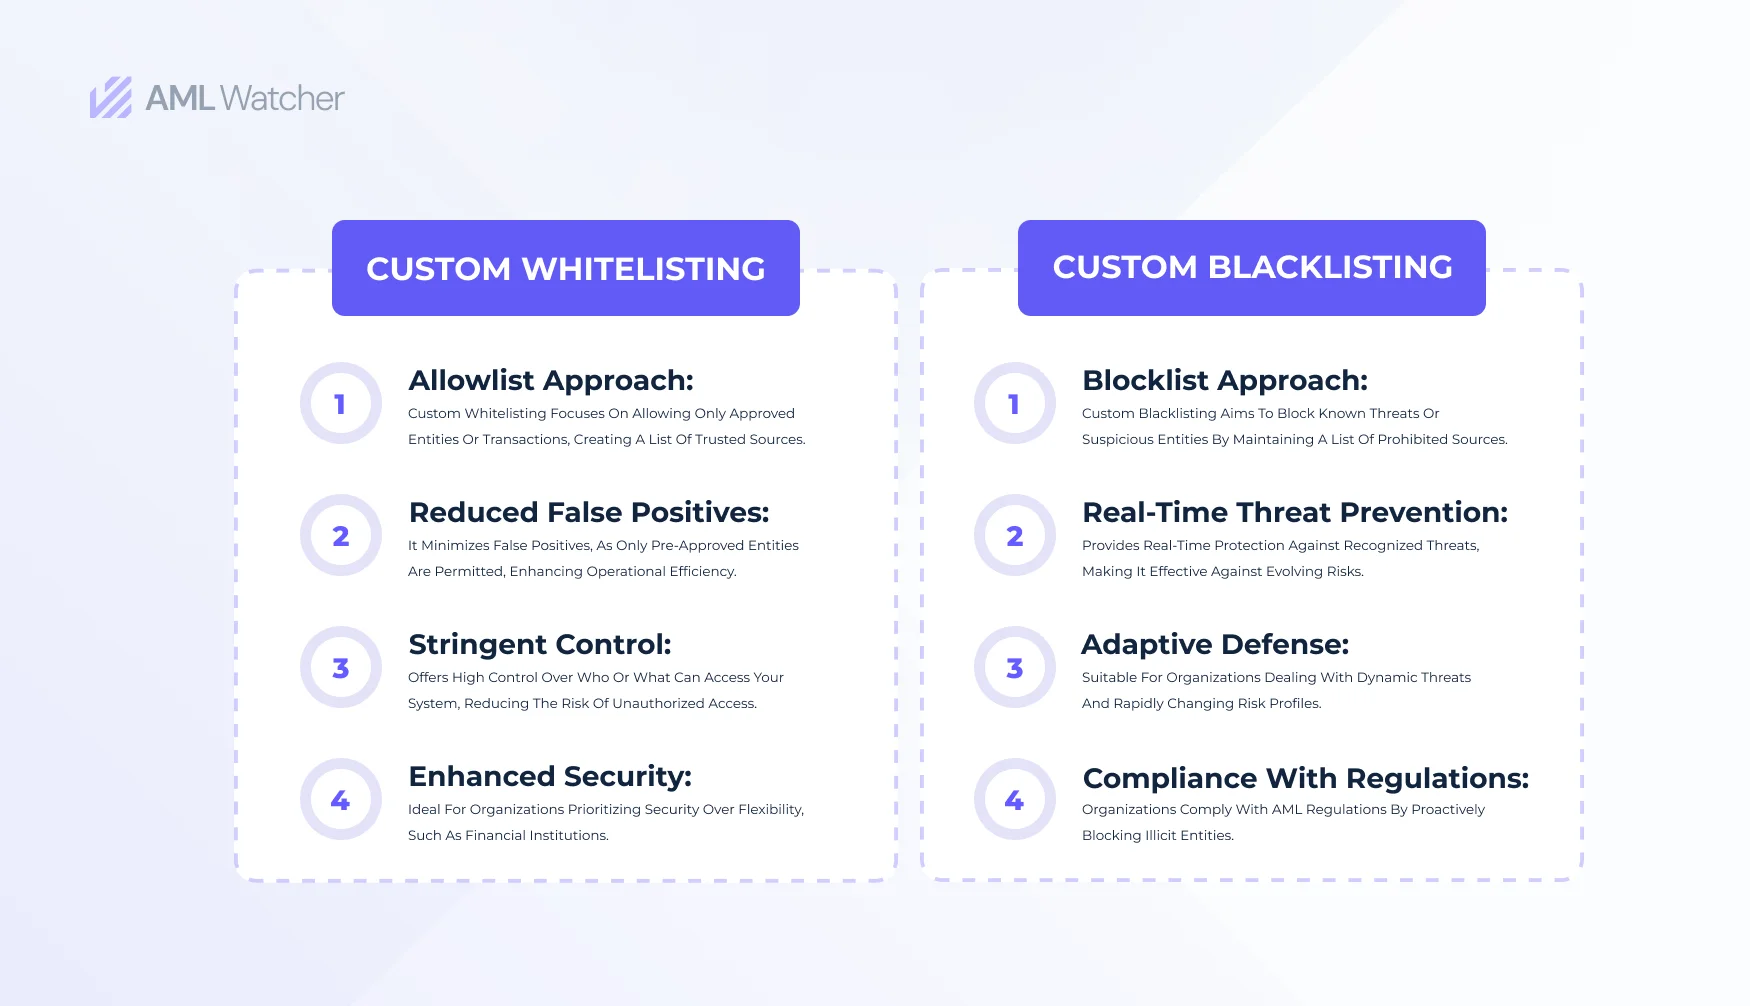 Innovations and Advancements in Custom Blacklisting